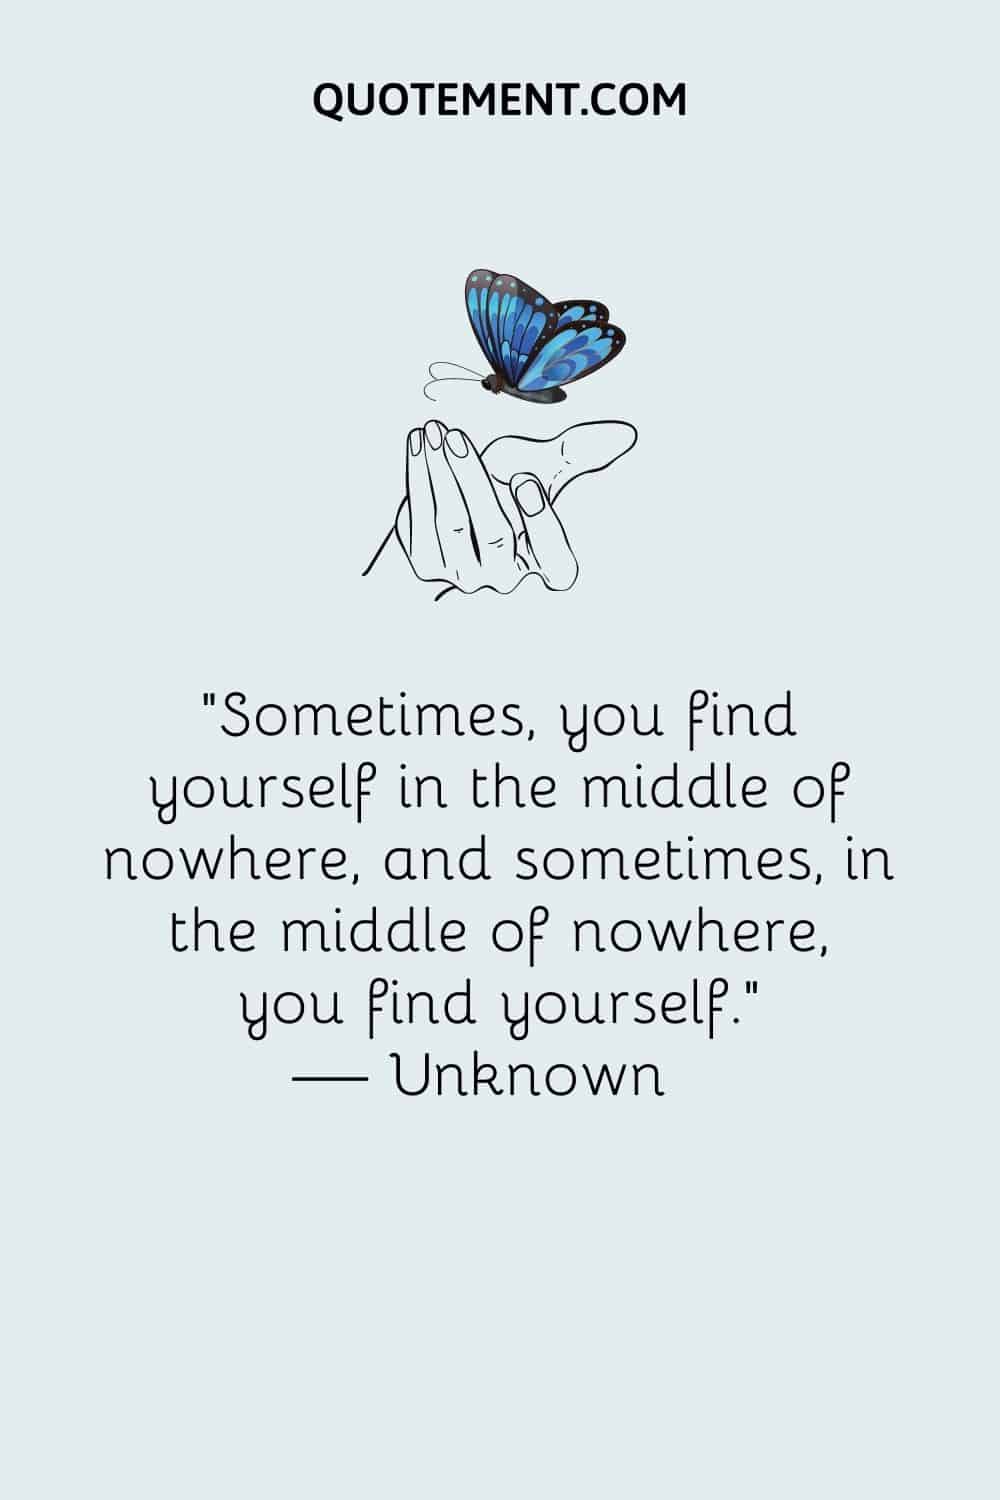 Sometimes, you find yourself in the middle of nowhere, and sometimes, in the middle of nowhere, you find yourself